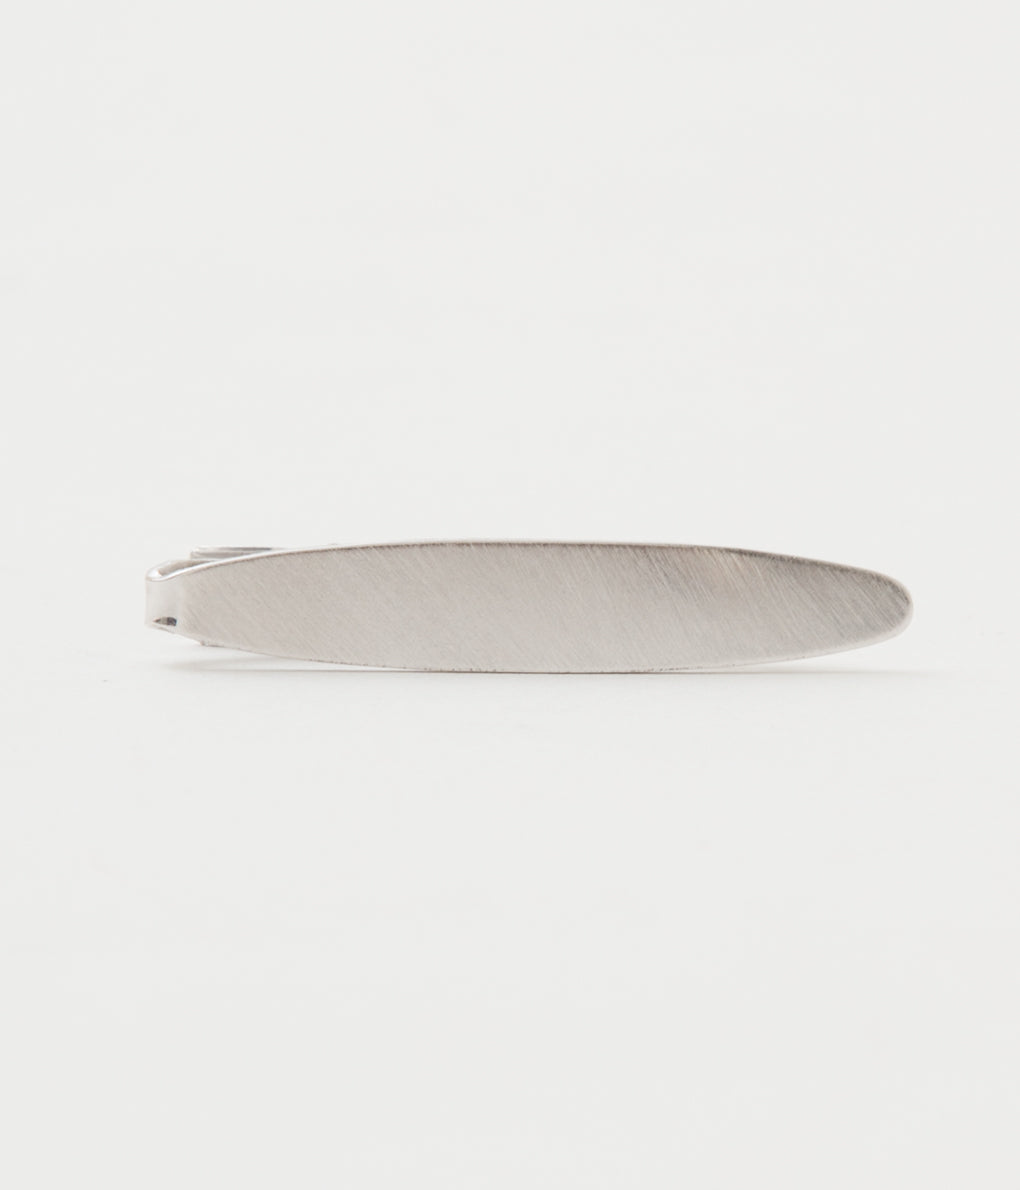 FINE AND DANDY "TIE BARS BRUSHED OVAL" (SILVER)